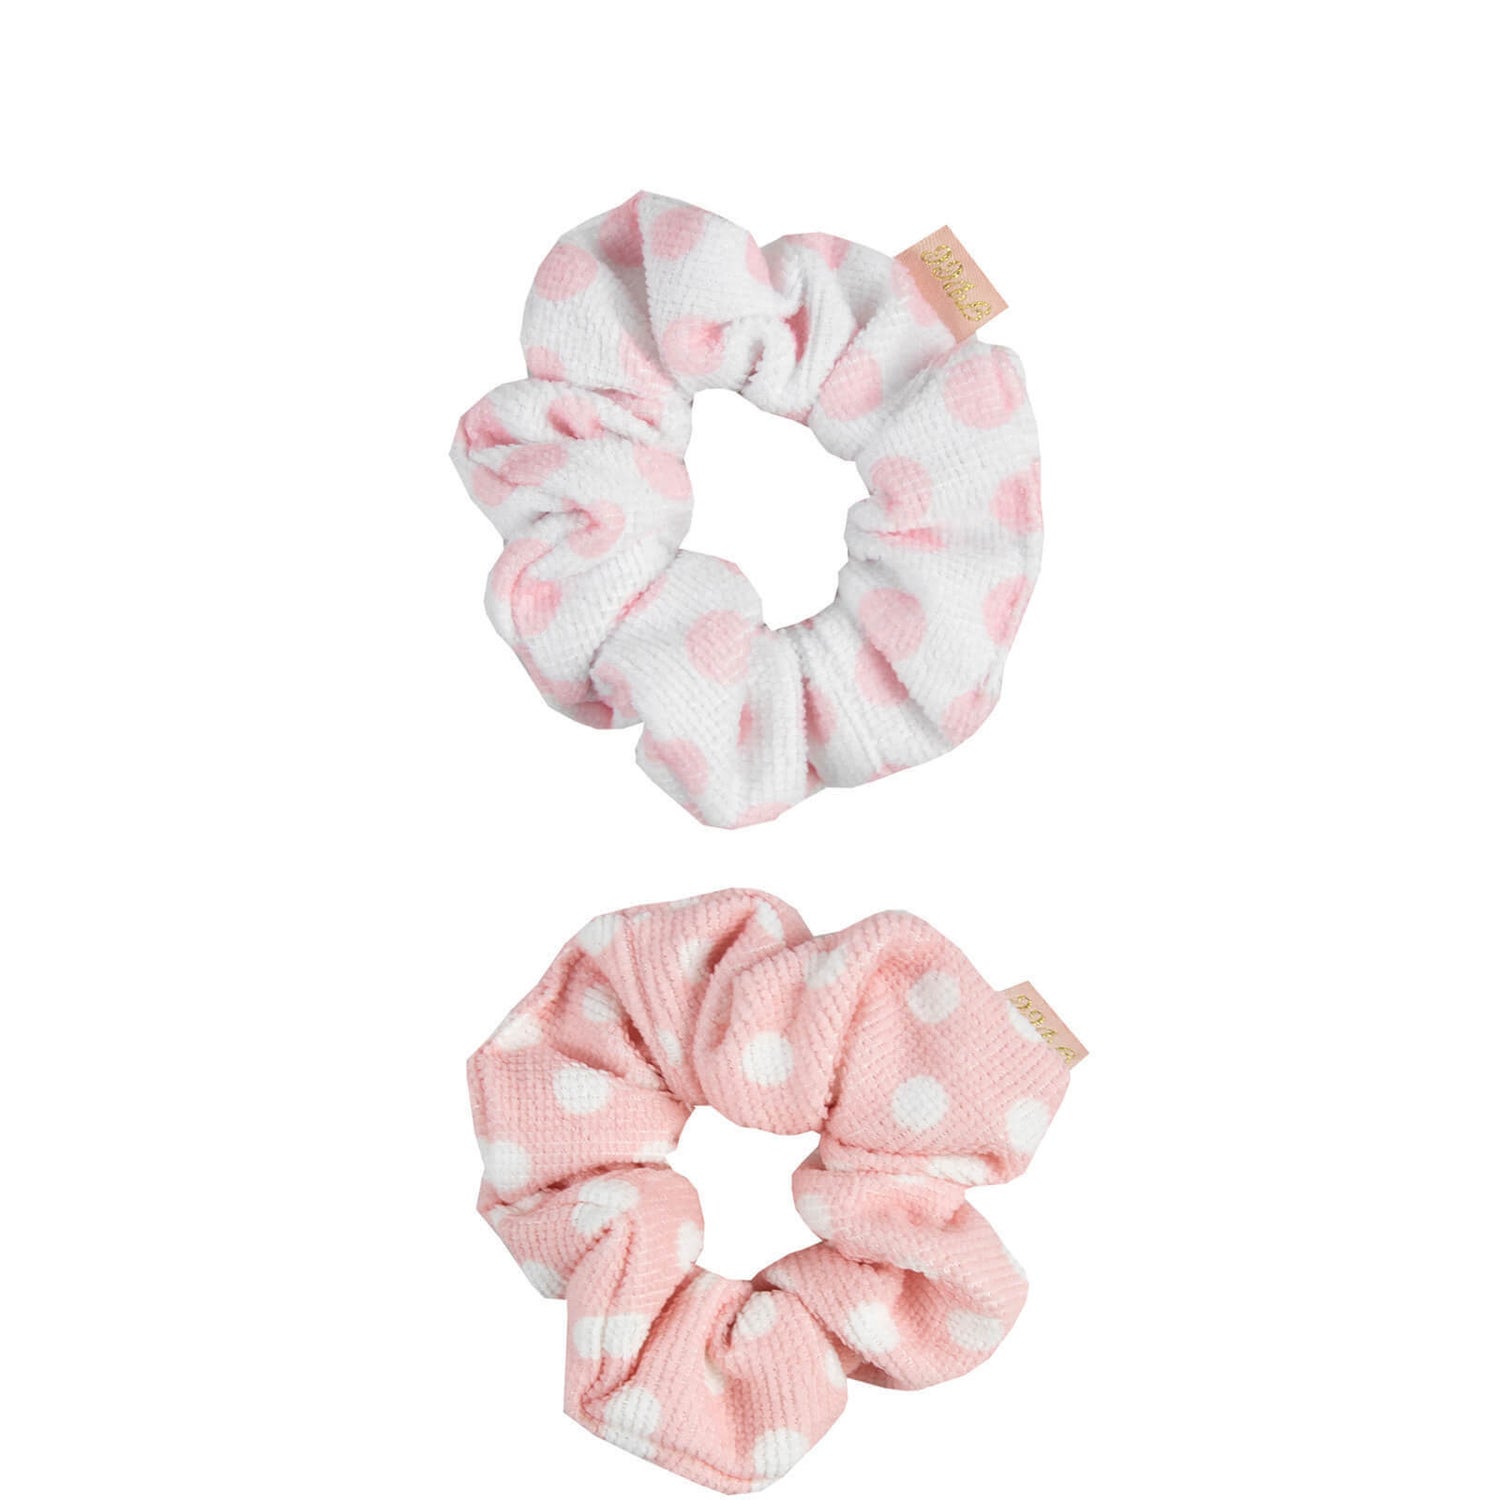 The Vintage Cosmetic Company Shower Microfibre Hair Scrunchies - Pink Polka Dot (Pacote de 2)